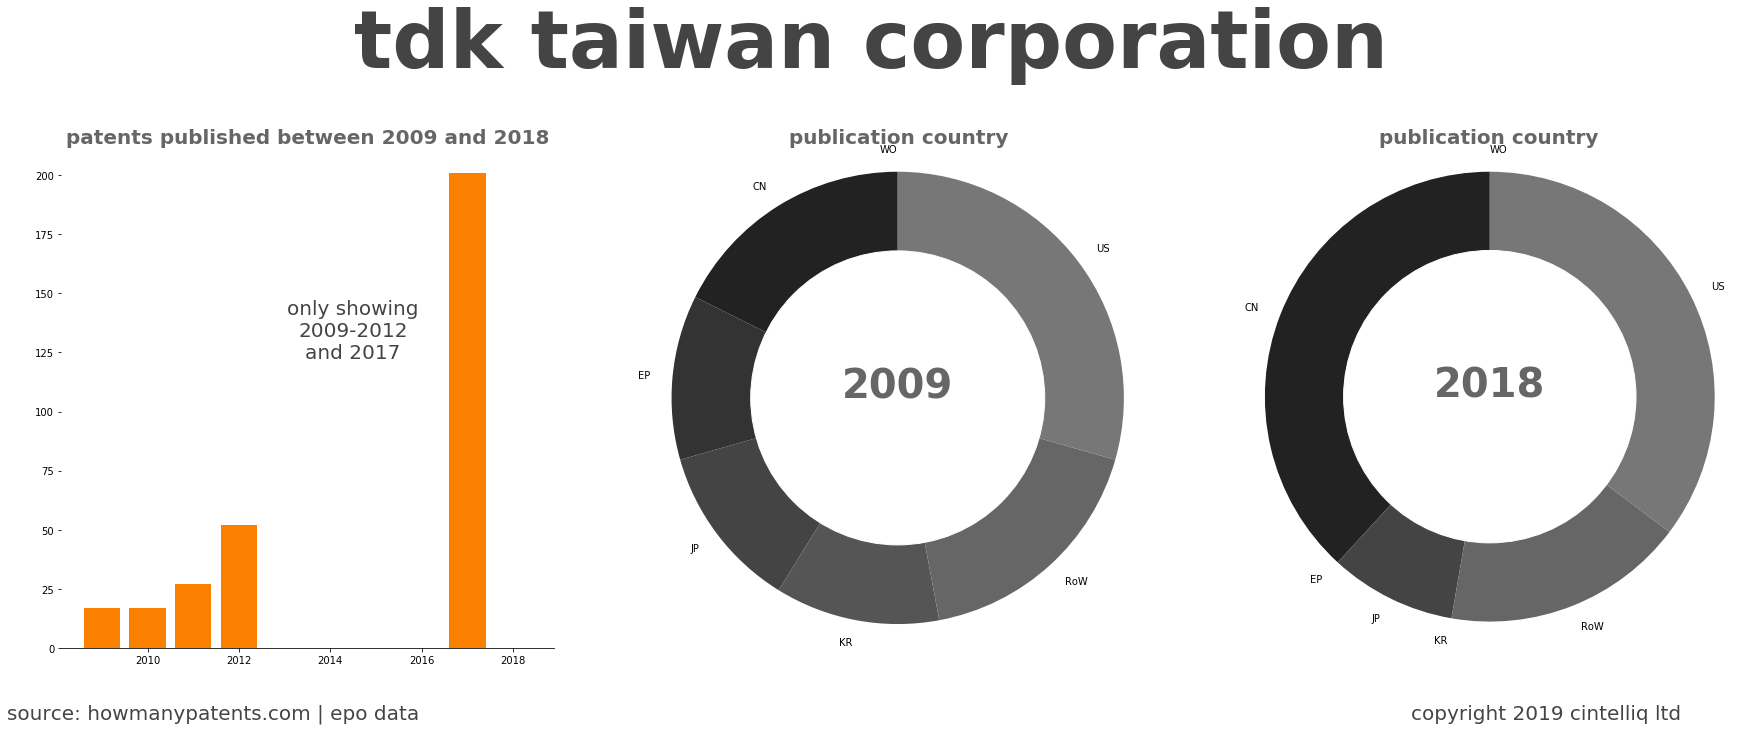 summary of patents for Tdk Taiwan Corporation